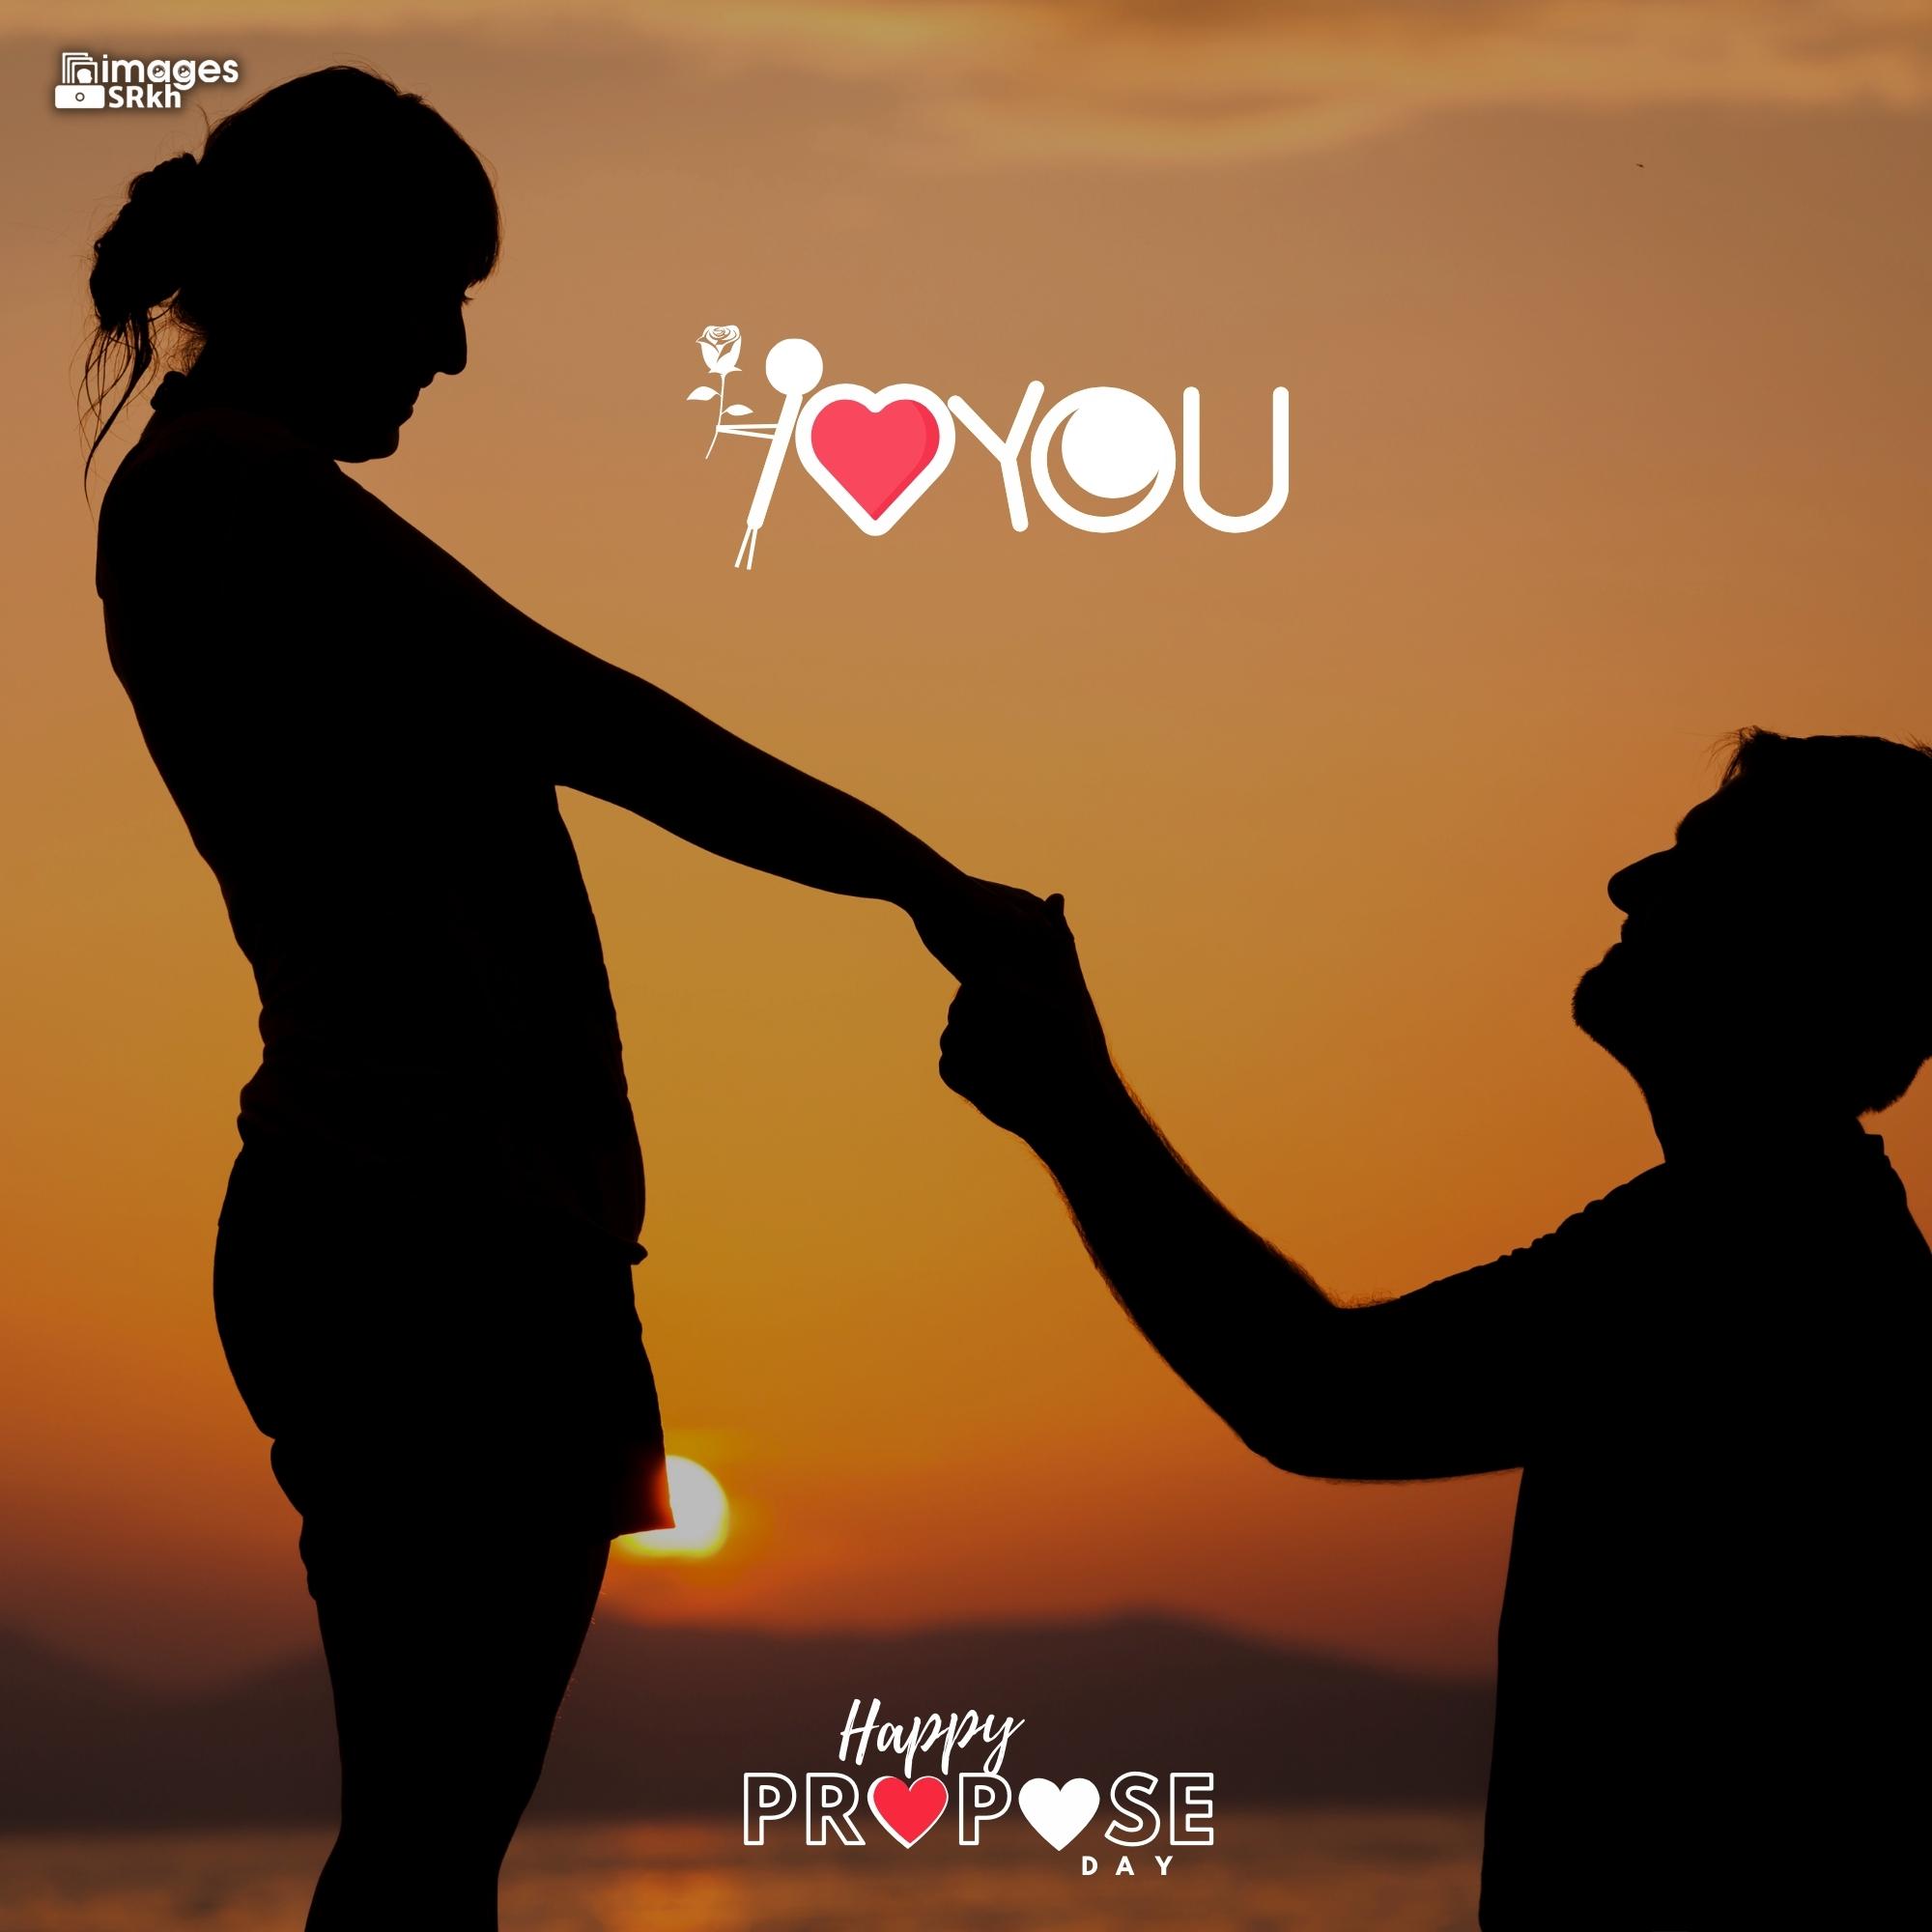 Happy Propose Day Images | 338 | I LOVE YOU